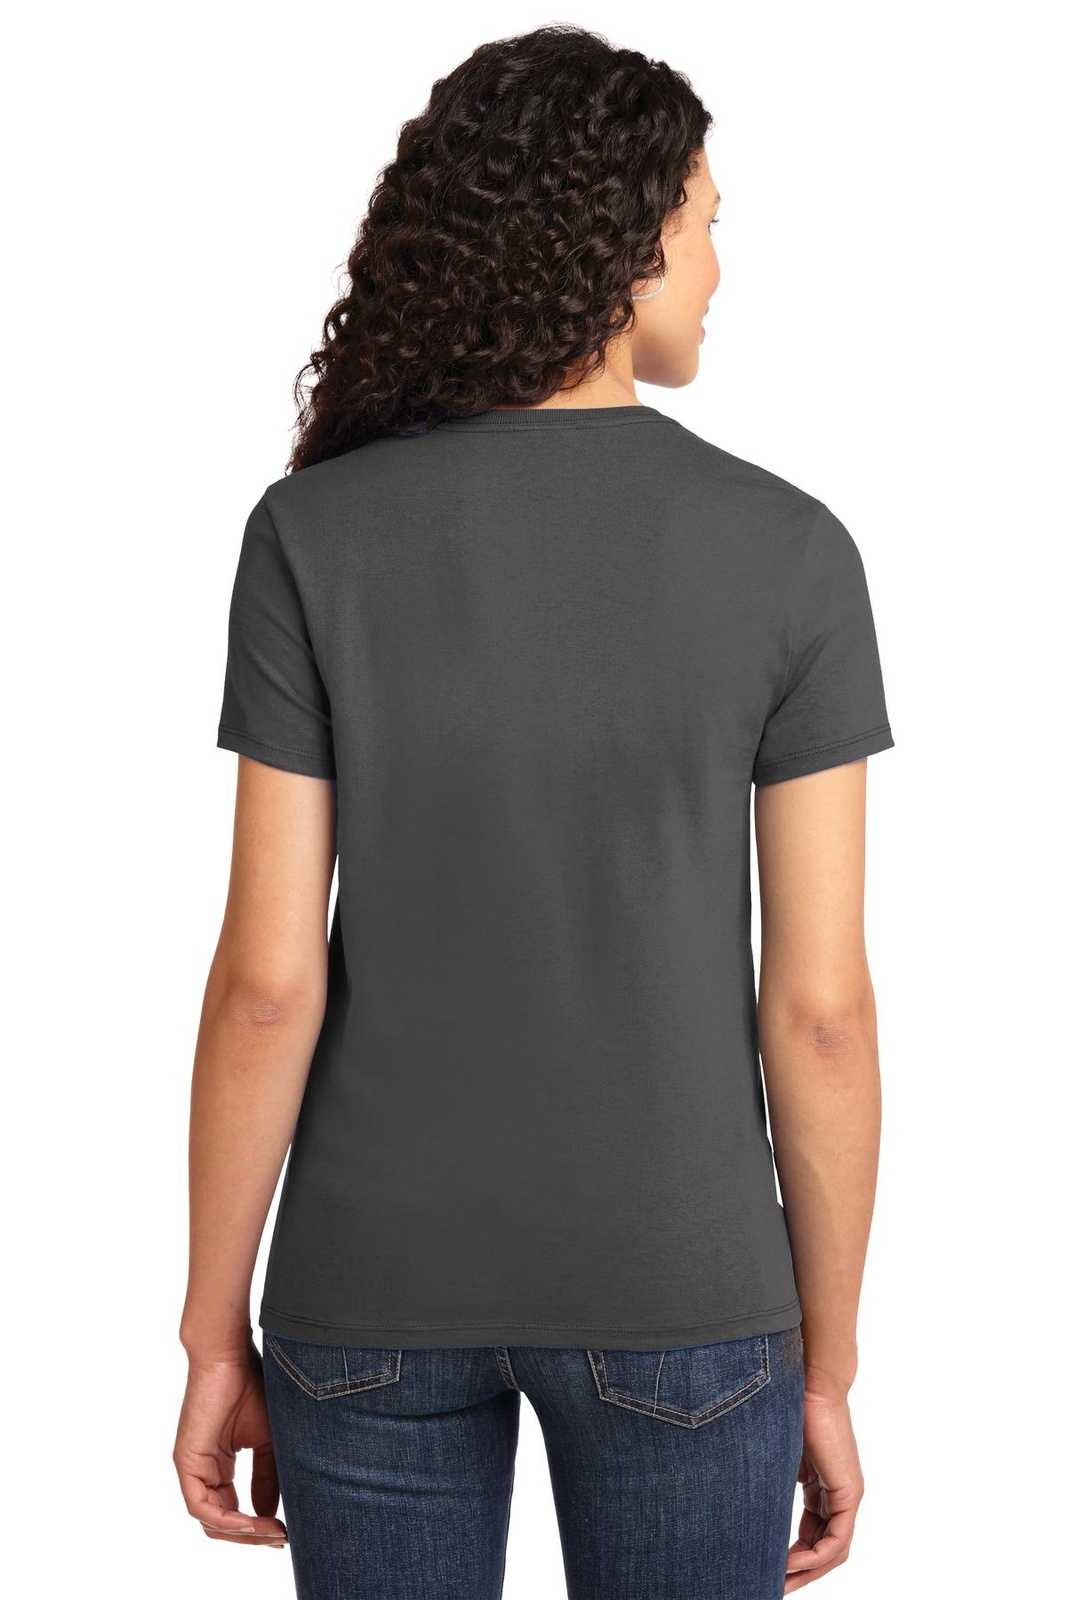 Port & Company LPC61 Ladies Essential Tee - Charcoal - HIT a Double - 1